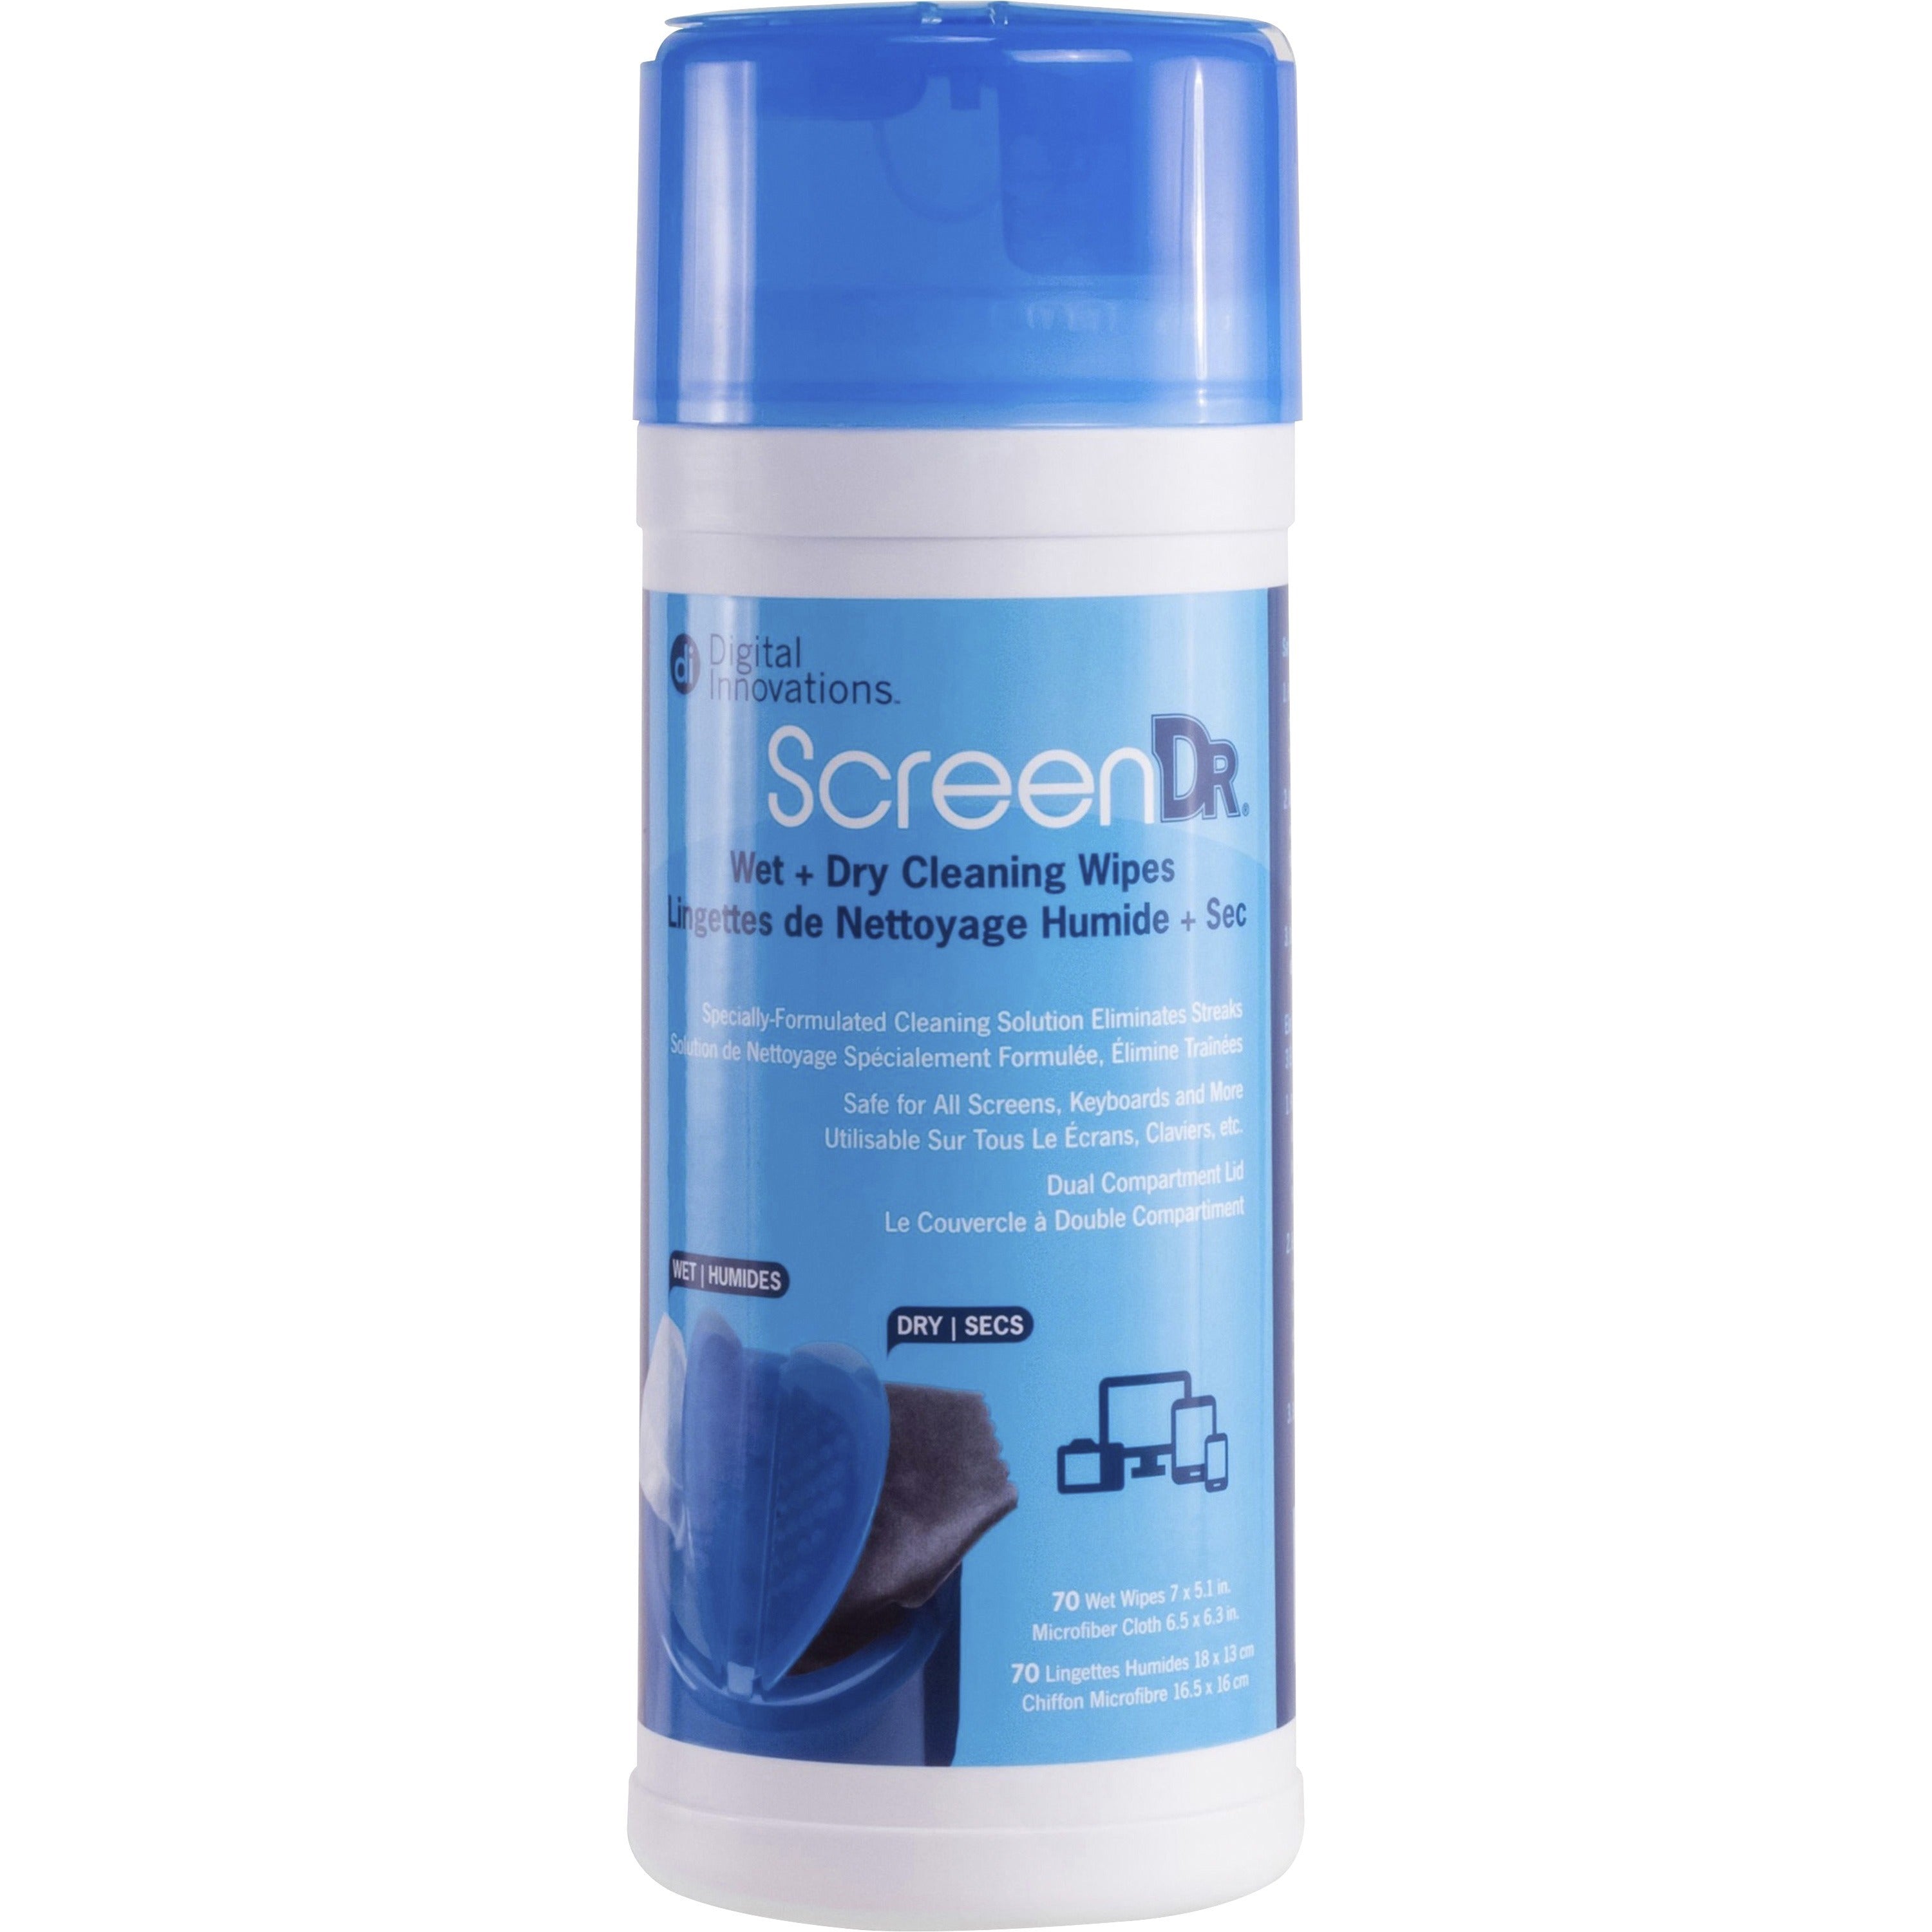 Digital Innovations ScreenDr Wet/Dry Streak-Free Wipes, 70-pack - For Electronic Equipment, Display Screen - Alcohol-free, Ammonia-free, Streak-free, Non-abrasive, Anti-static, Soft - 70 / Pack - 1 Each - White, Blue - 1